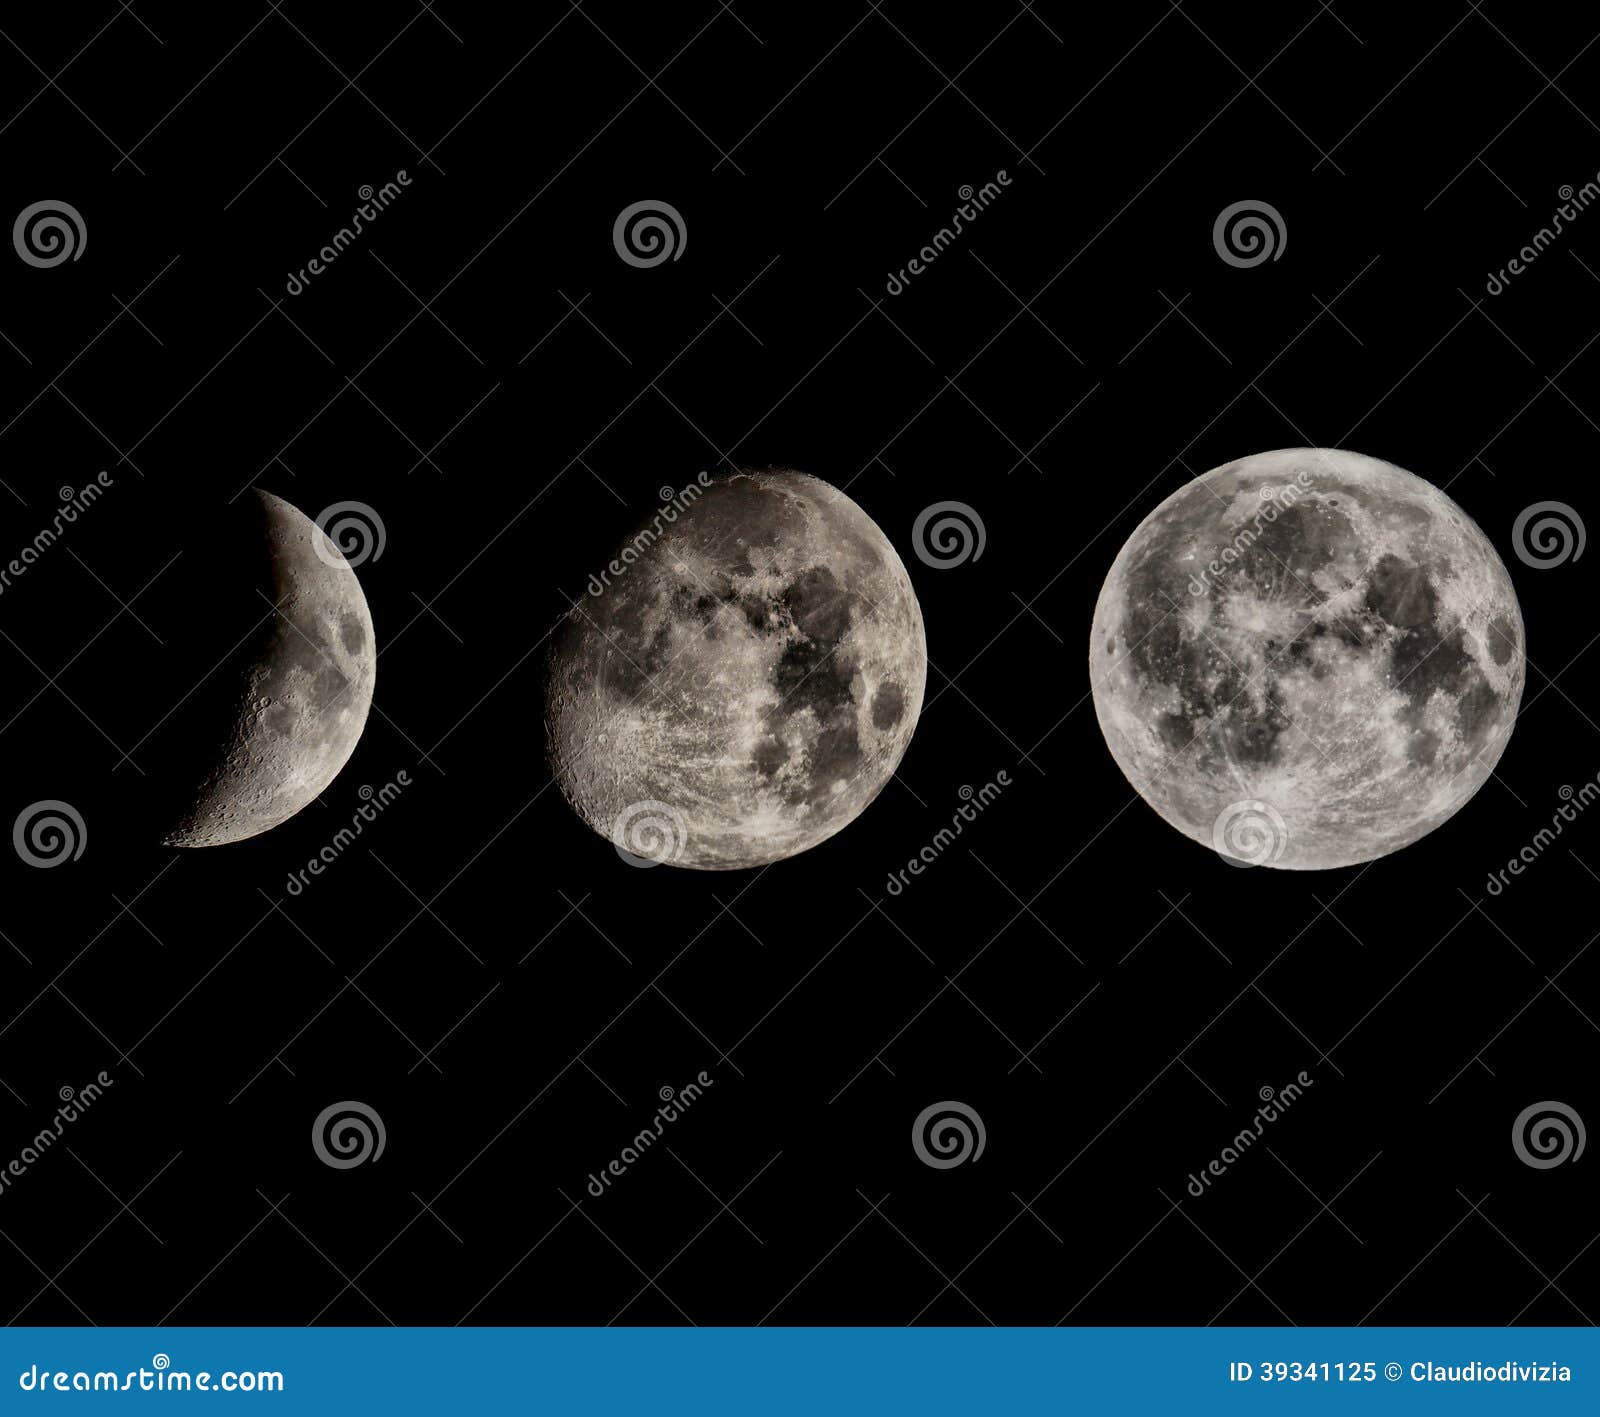 Moon phases stock image. Image of fullmoon, dark, astronomy - 39341125